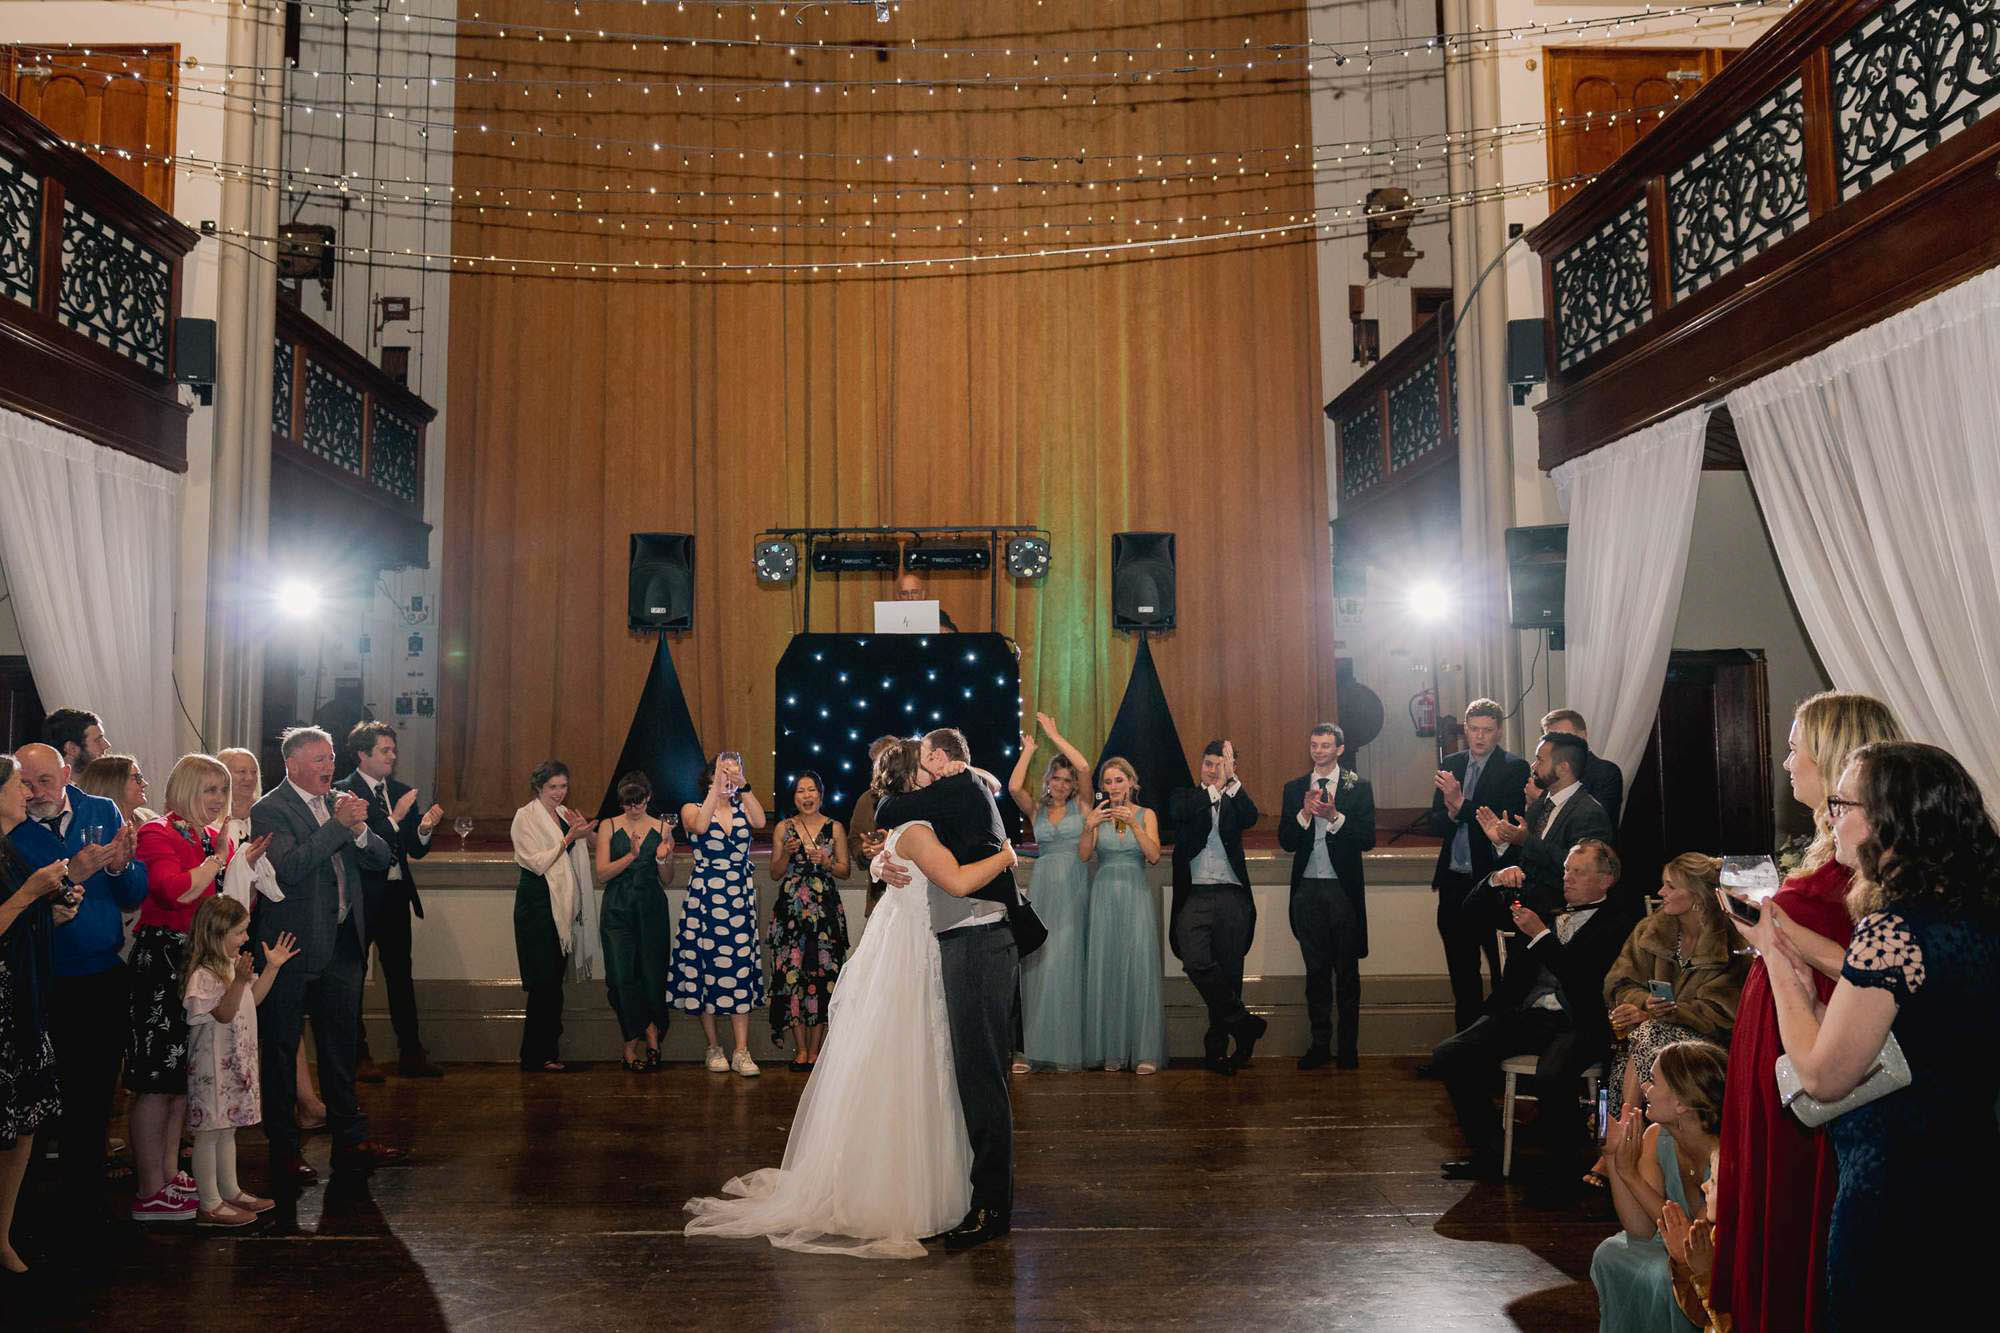 Bride and groom have their first dance together on their wedding day.